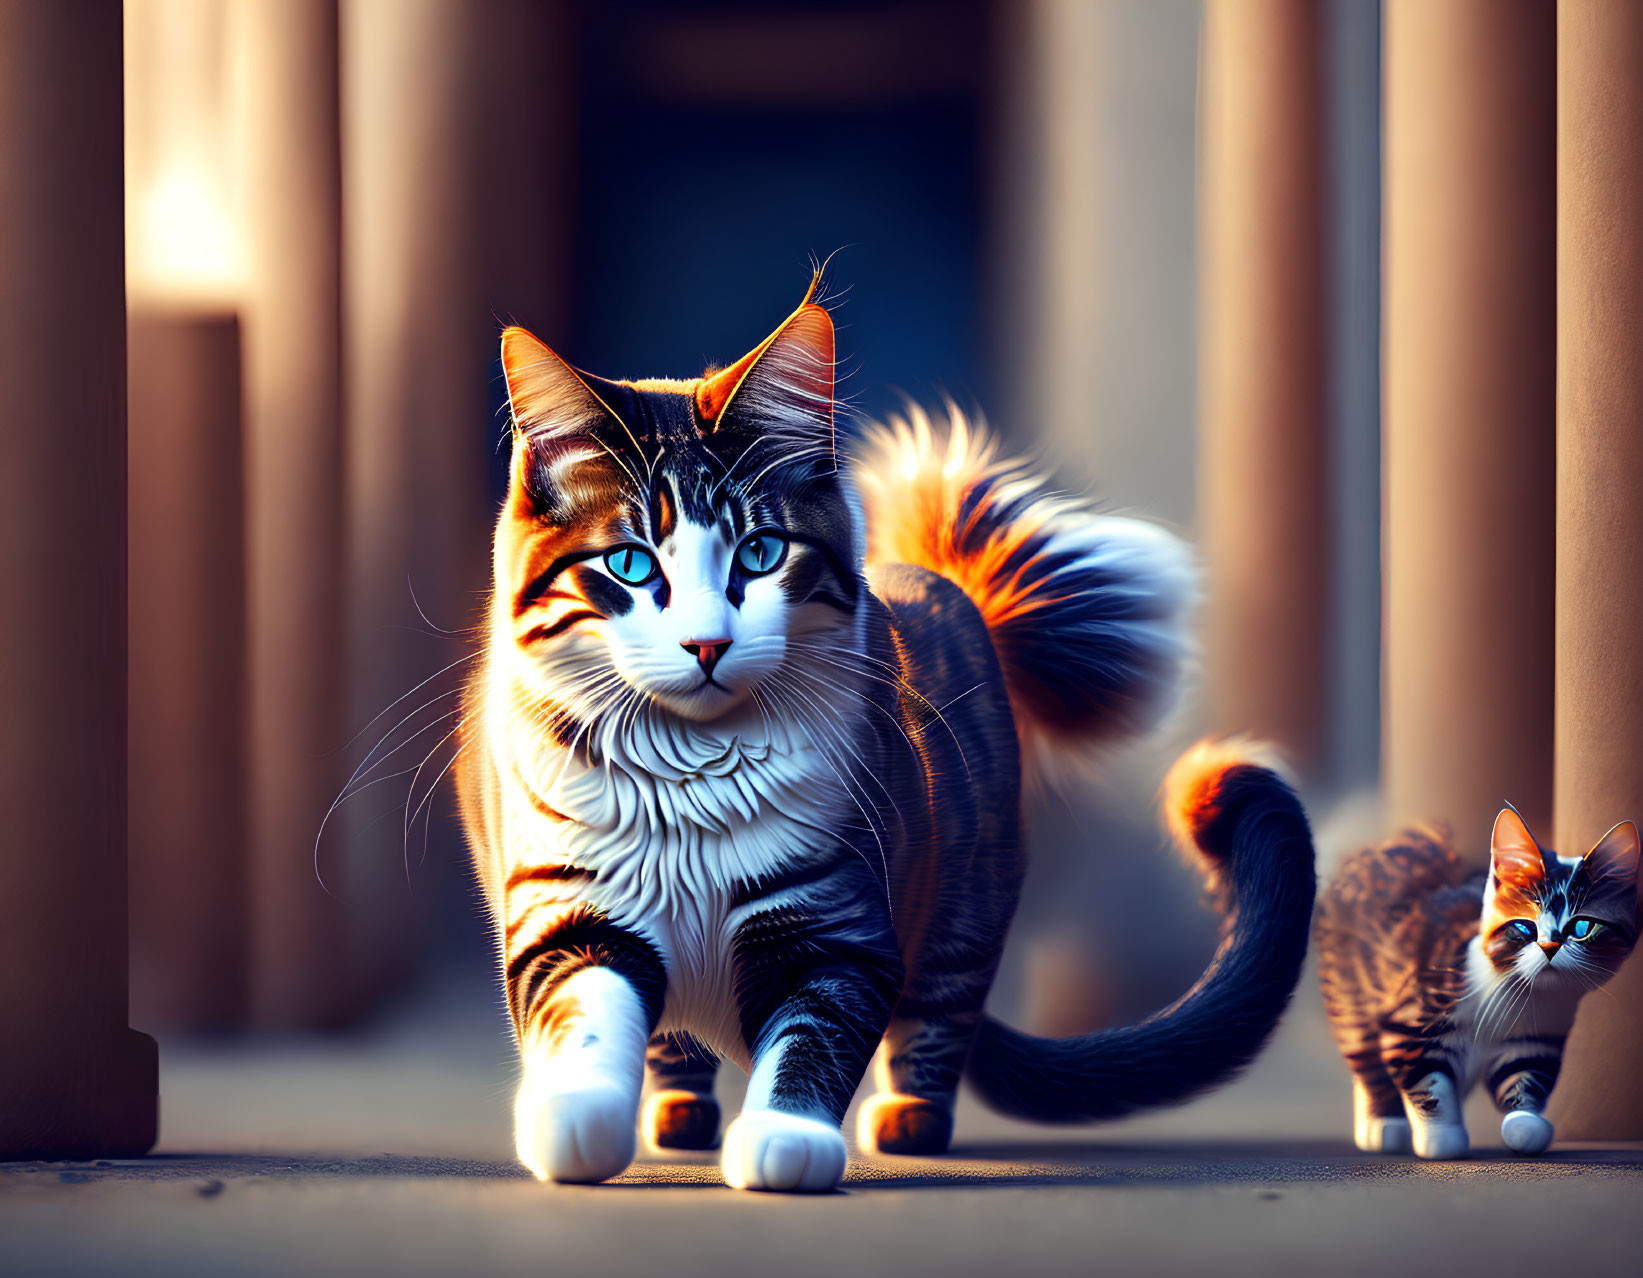 Two Striped Cats with Blue Eyes Walking in Hallway with Columns